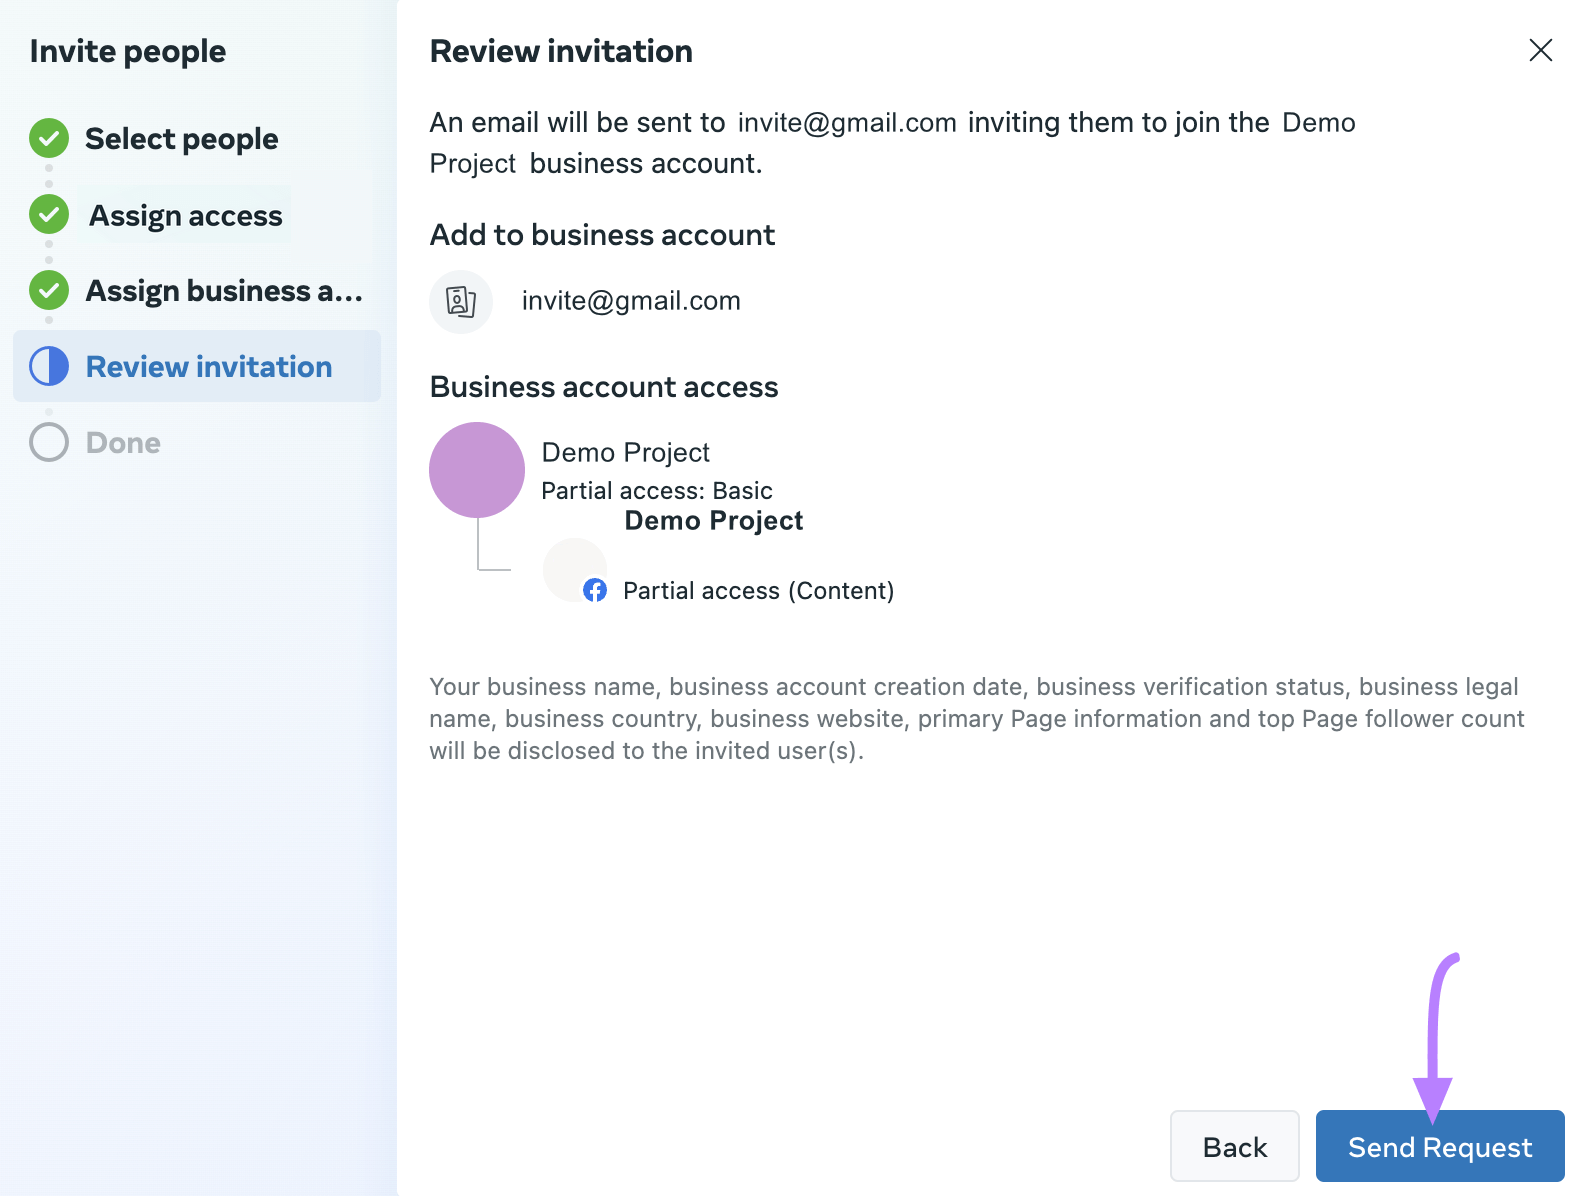 “Send Request” button highlighted under "Review invitation" window